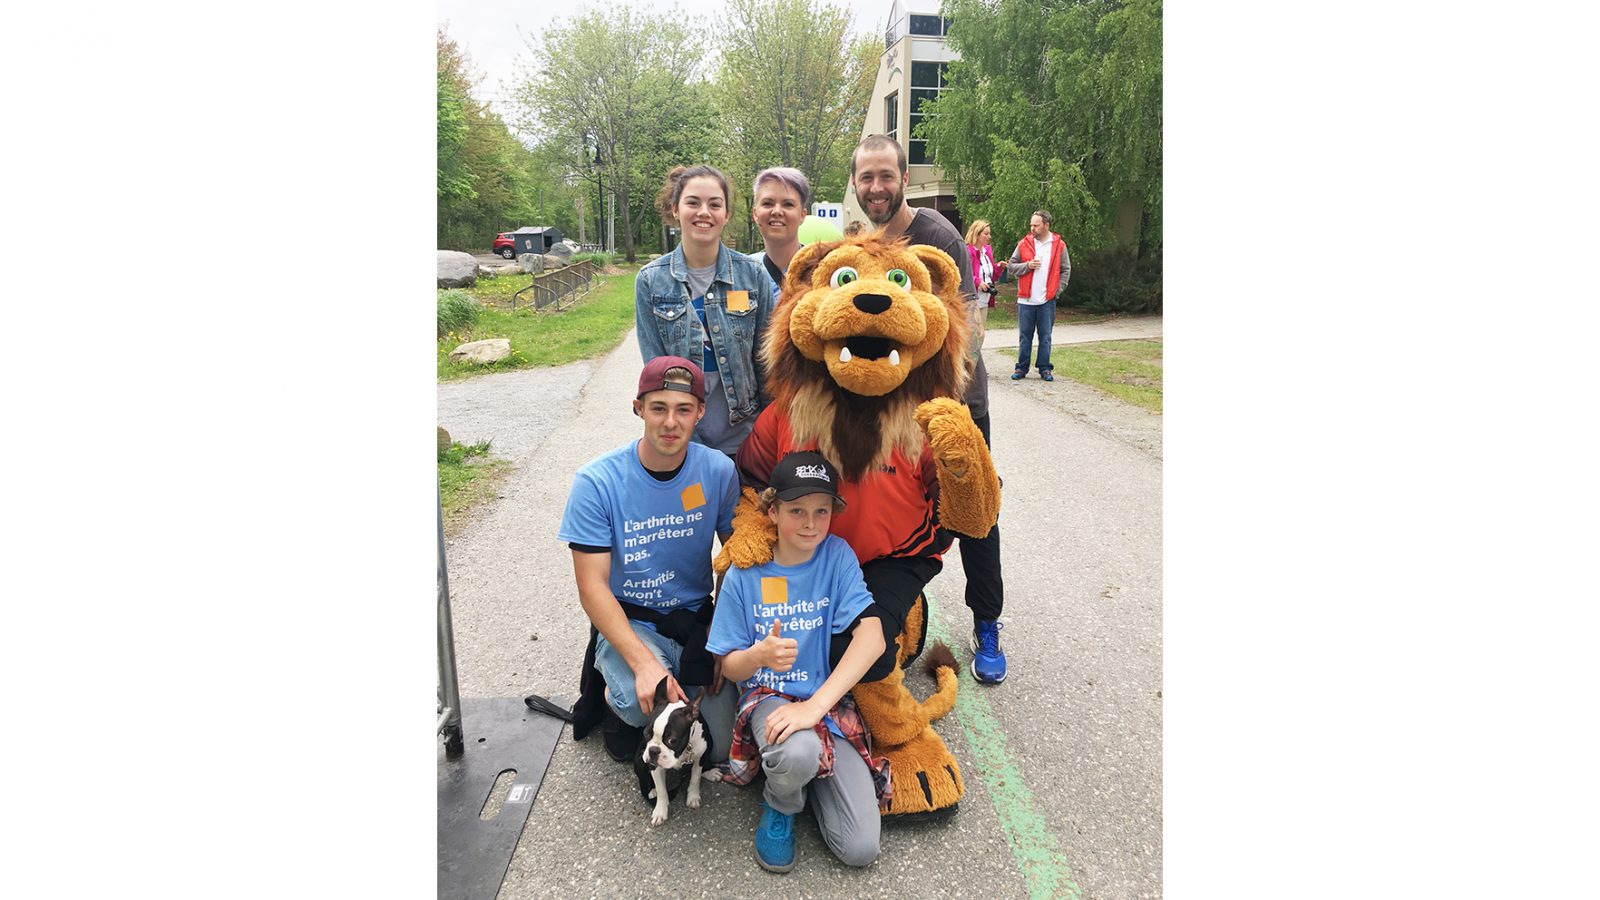 Sherbrooke’s Walk for Arthritis raises $14,500 for research